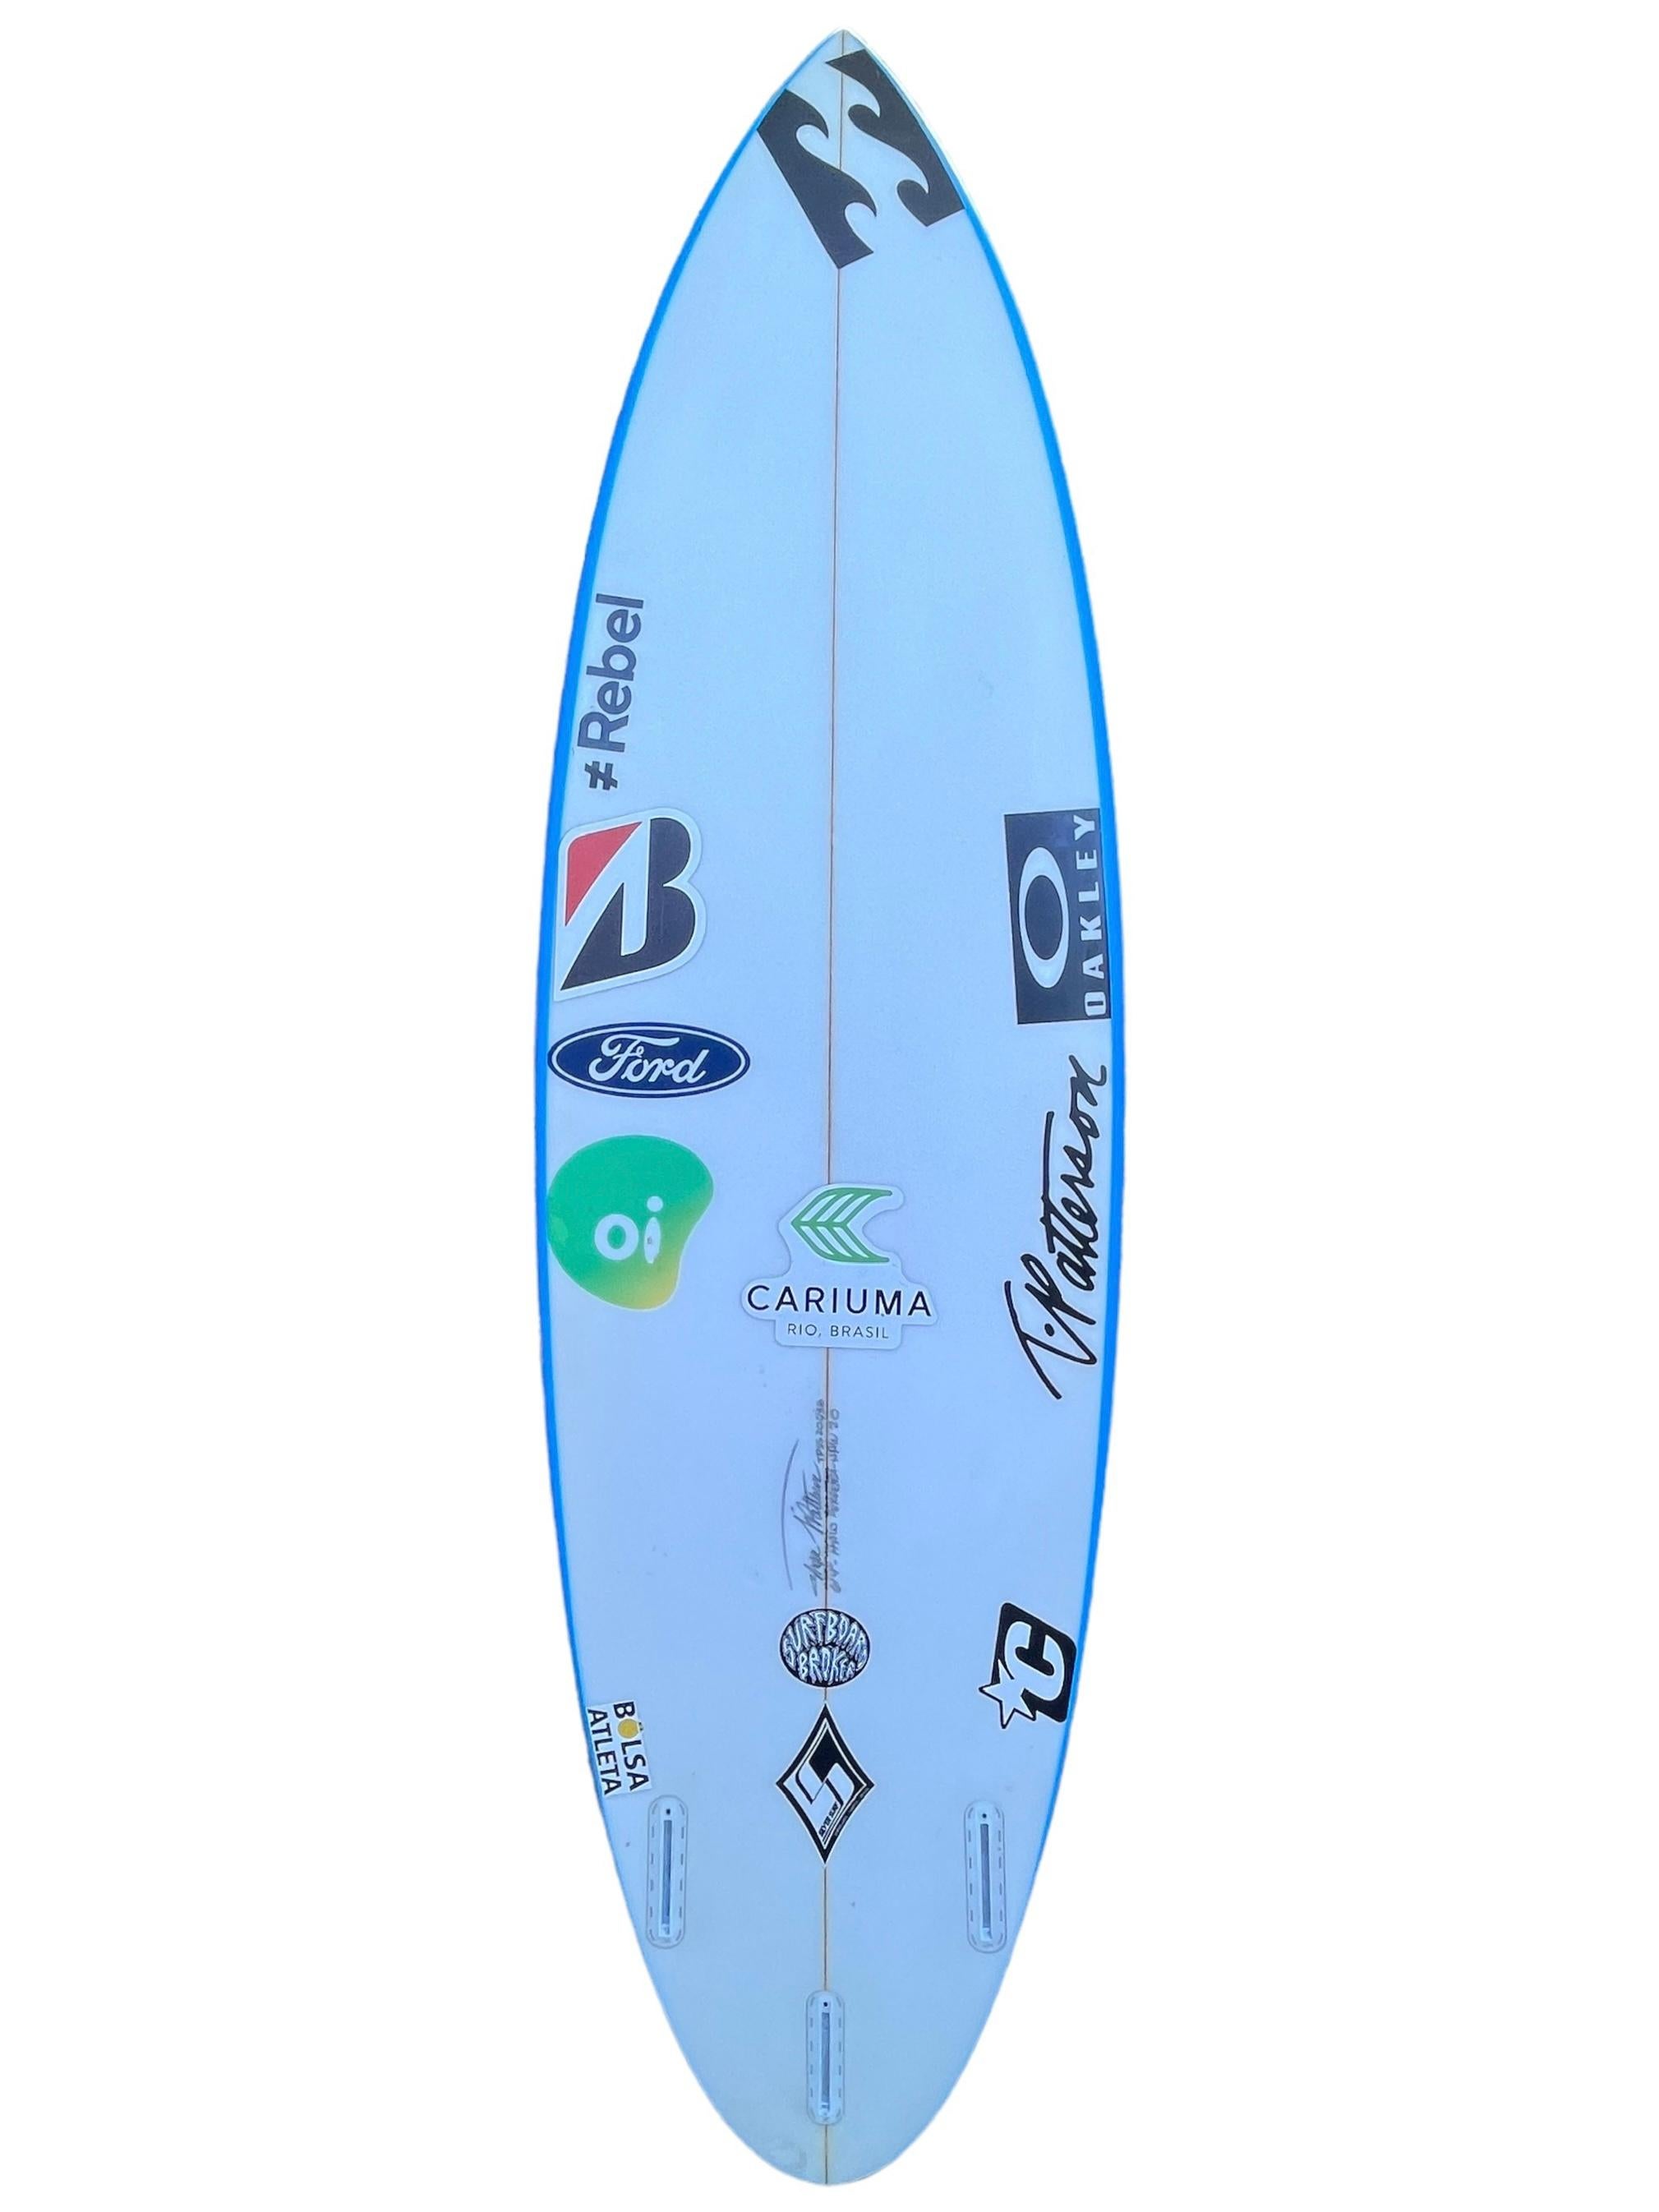 Olympic Gold medalist and World Champion of Surfing Italo Ferreira’s personal surfboard. Made by T. Patterson. Italo Ferreira won the first ever Olympic Gold medal in the sport of surfing at the 2020 Tokyo Summer Olympics. Ferreira was also the 2019